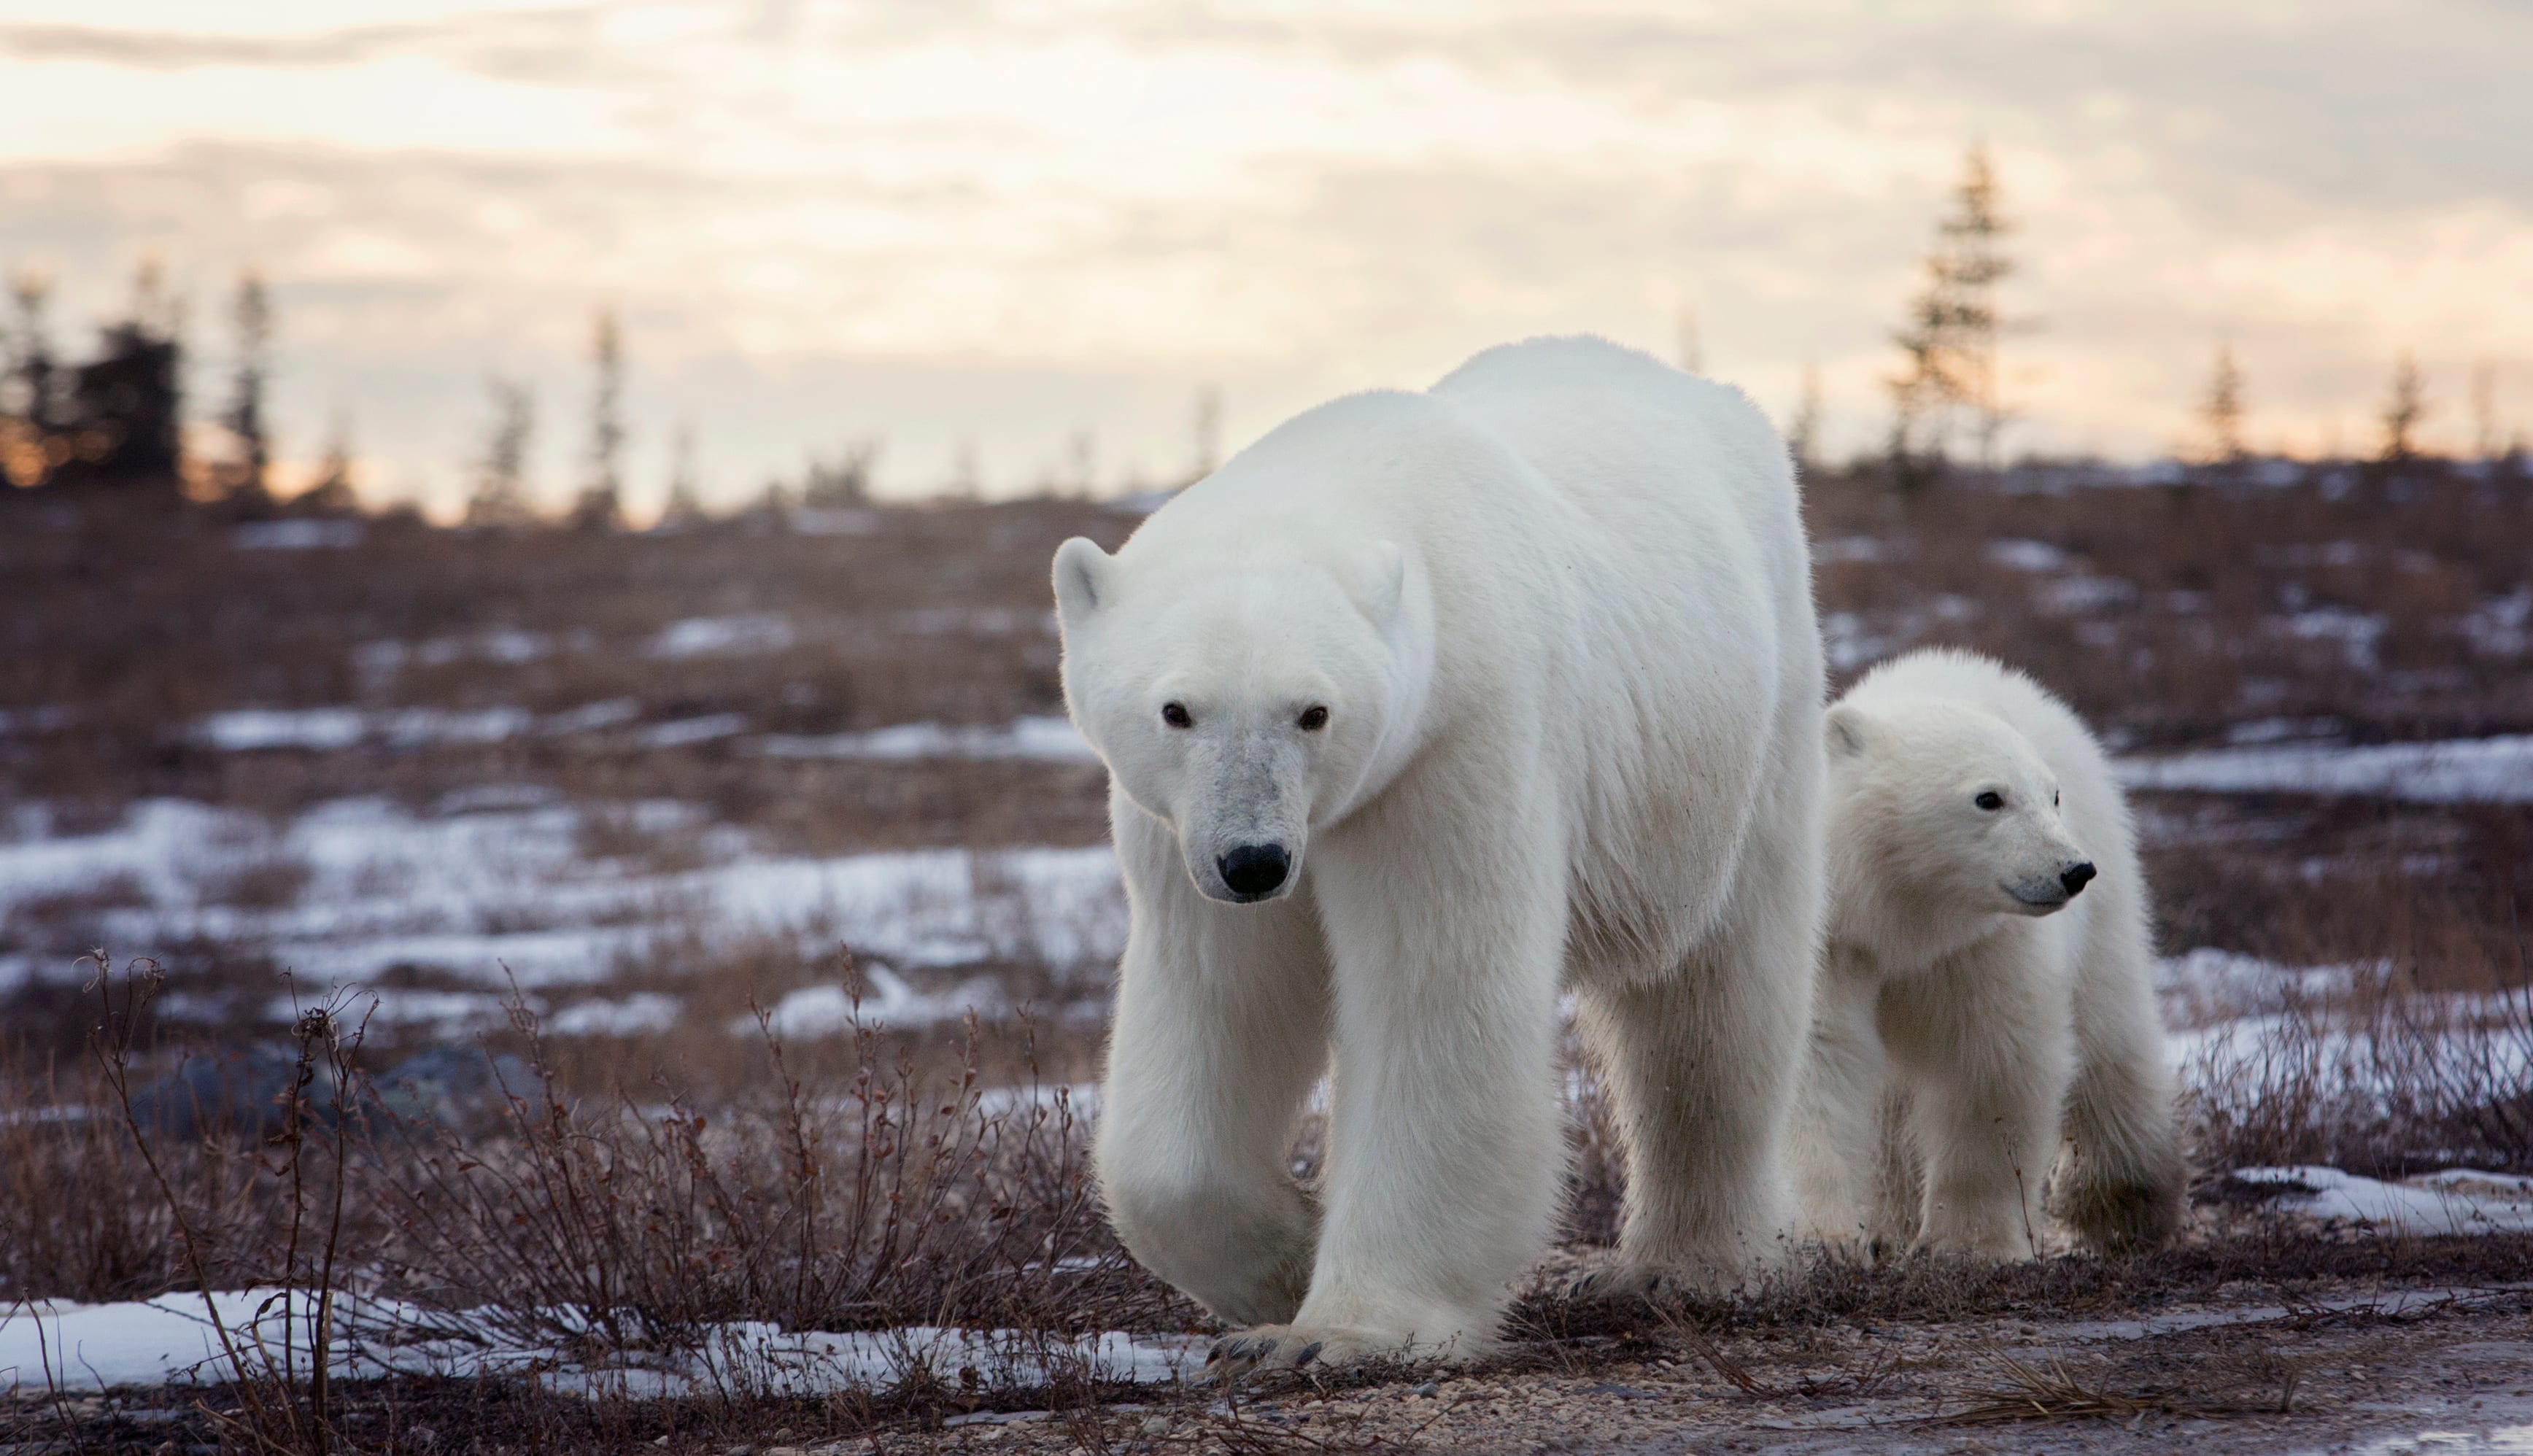 Two polar bears in Churchill, Manitoba as part of the Lords of the Wilderness Bear Viewing train